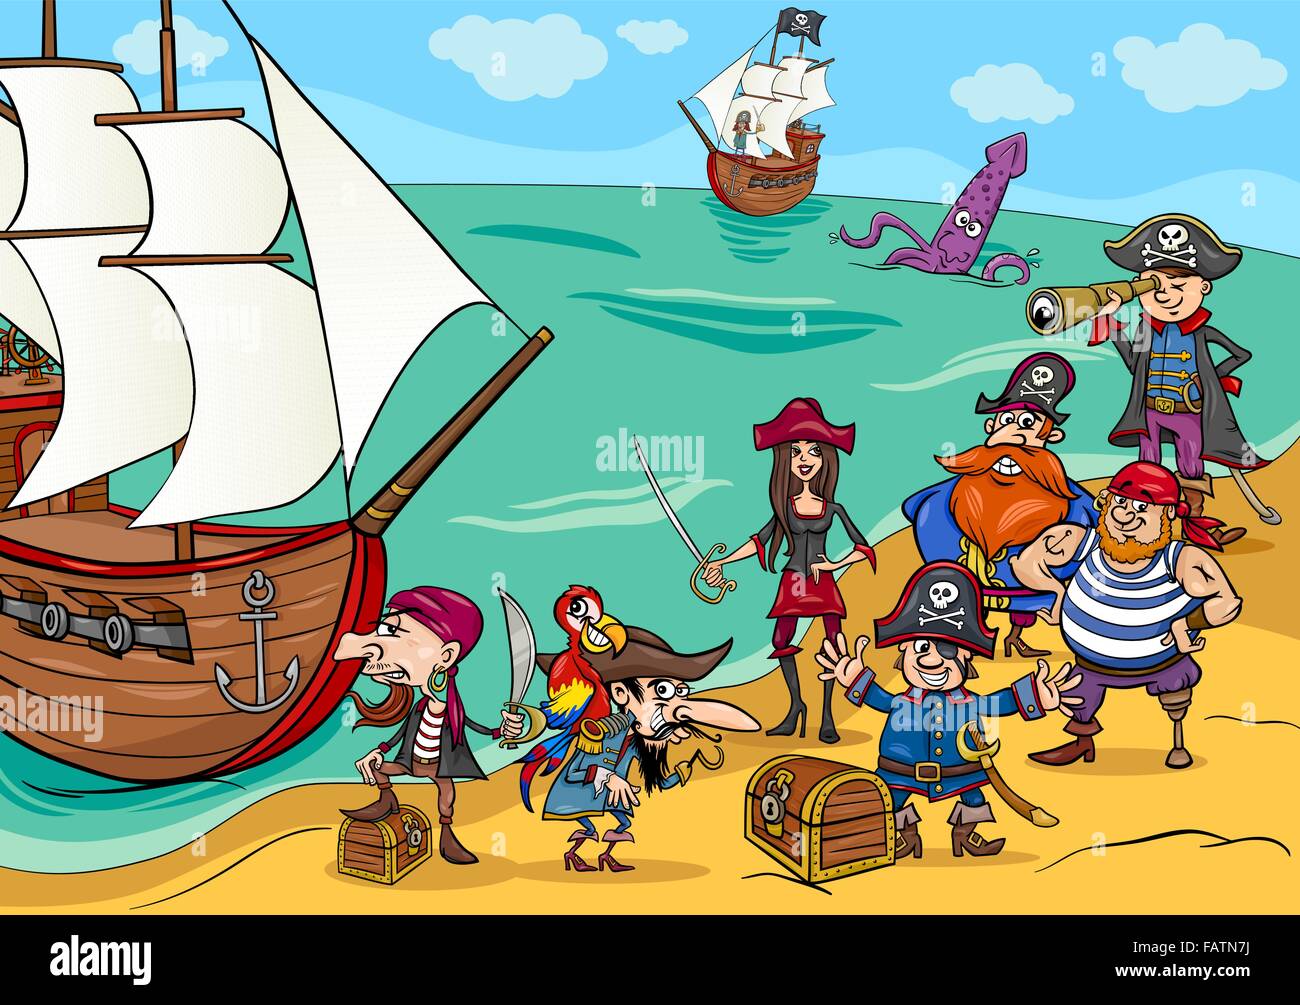 Cartoon Illustrations of Fantasy Pirate Characters with Ship on Treasure Island Stock Vector